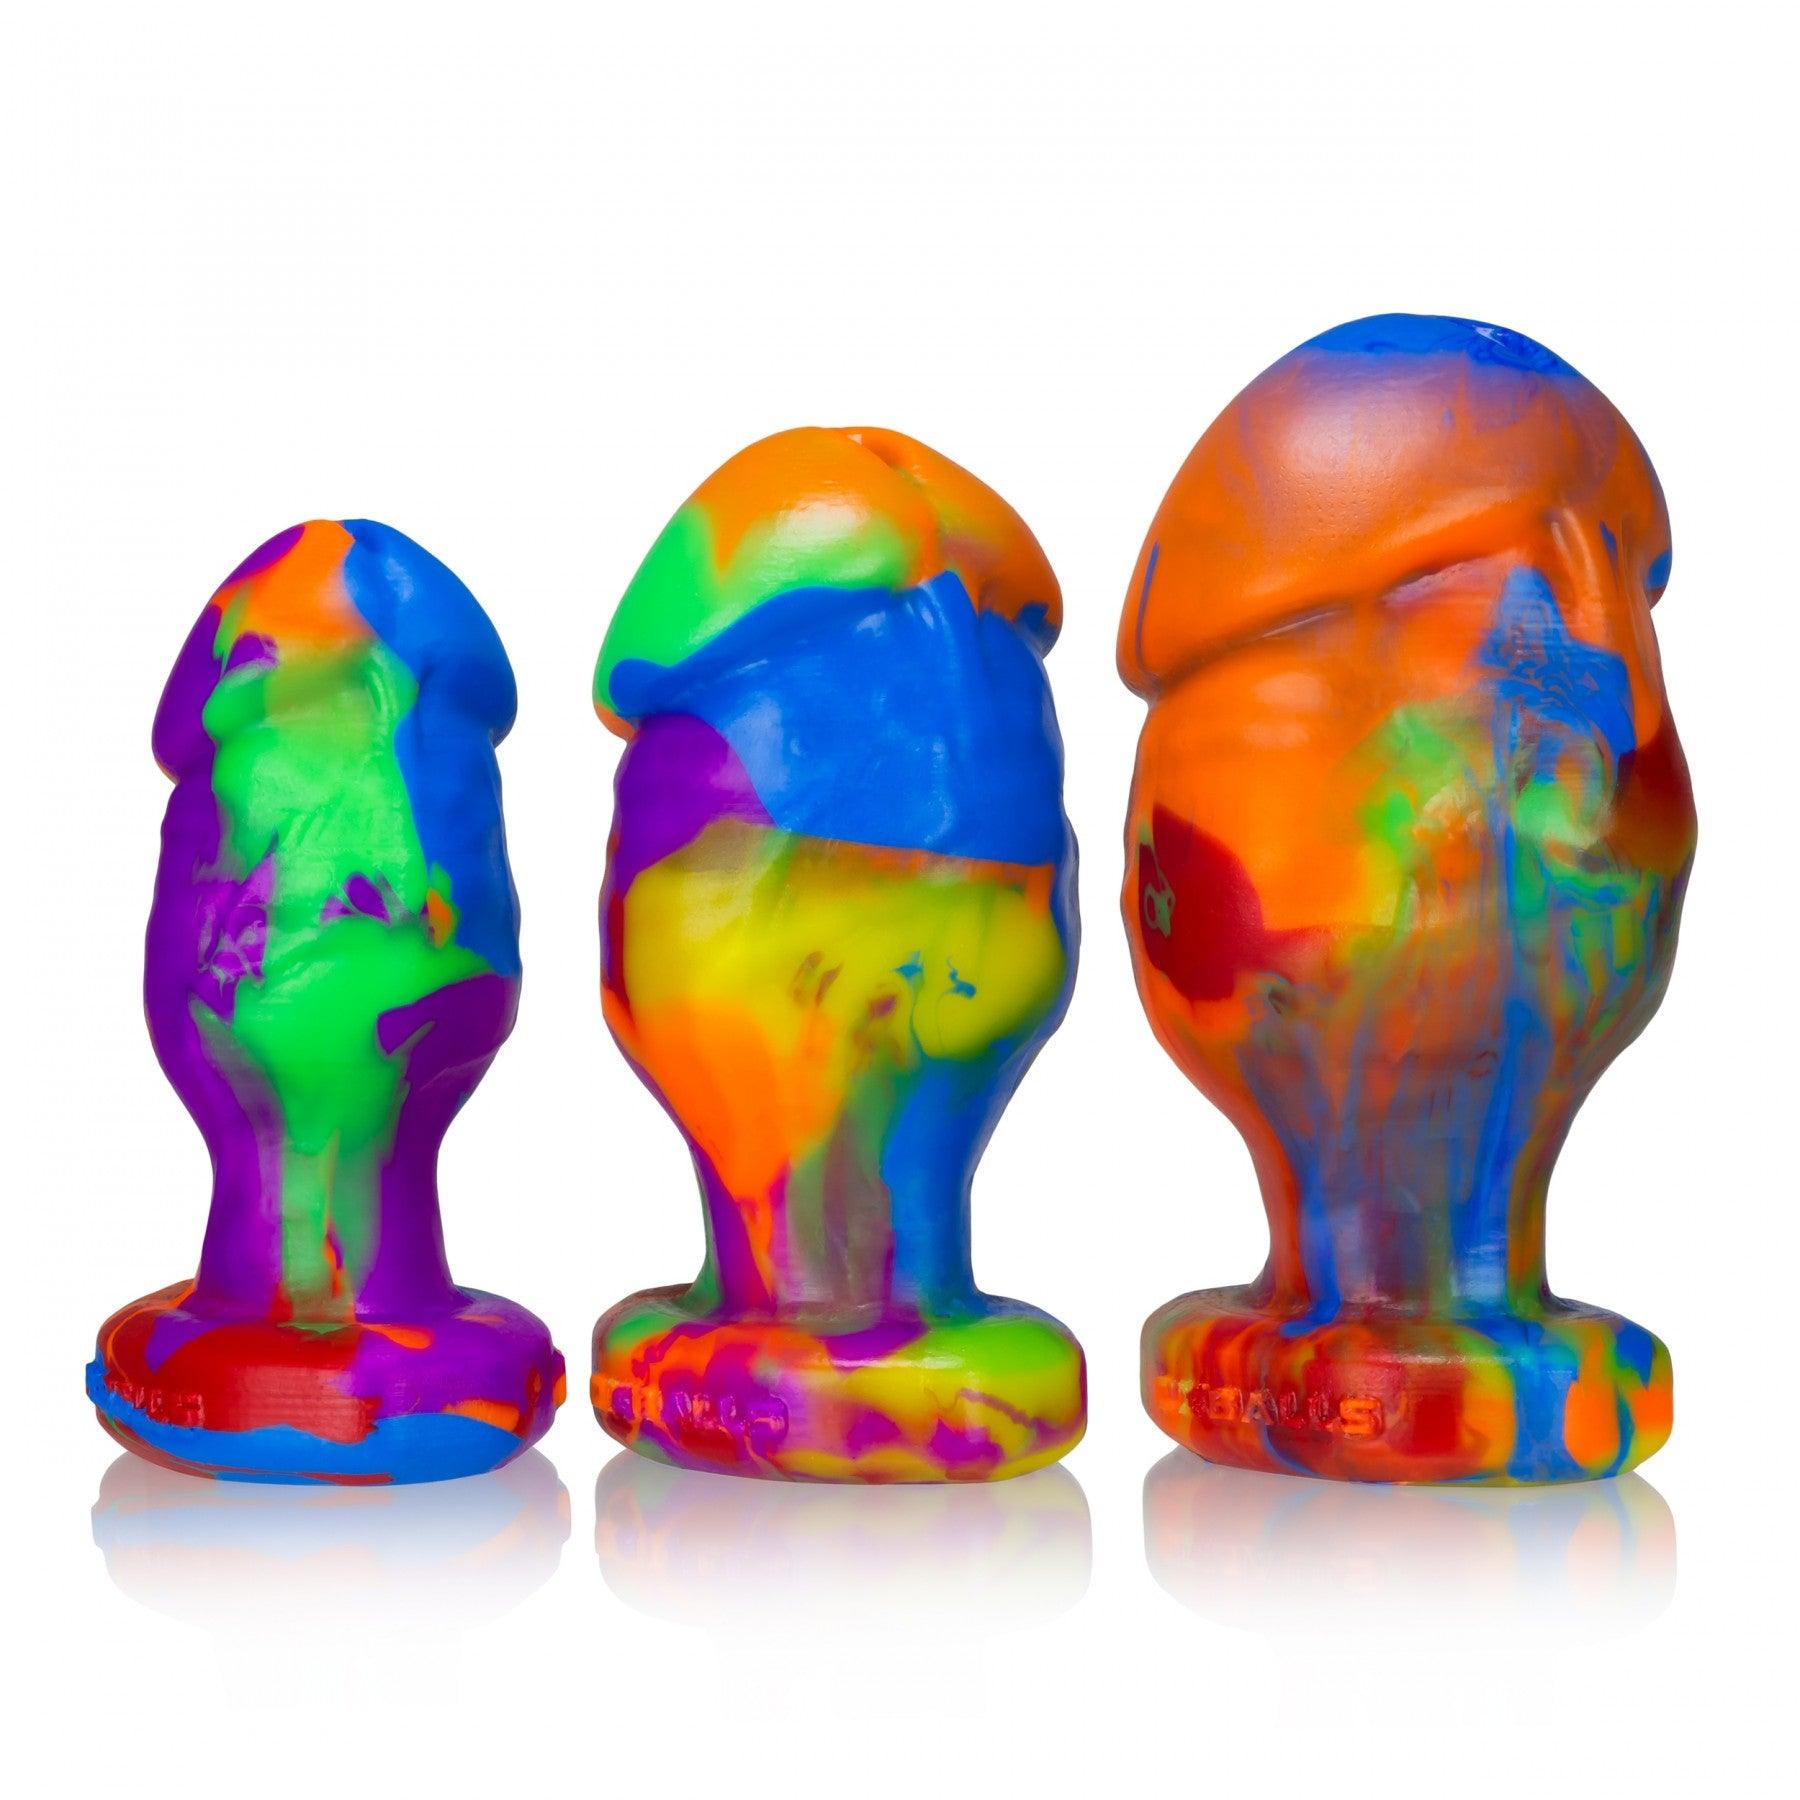 Honcho Silicone Anal Plug Rainbow - Buy At Luxury Toy X - Free 3-Day Shipping